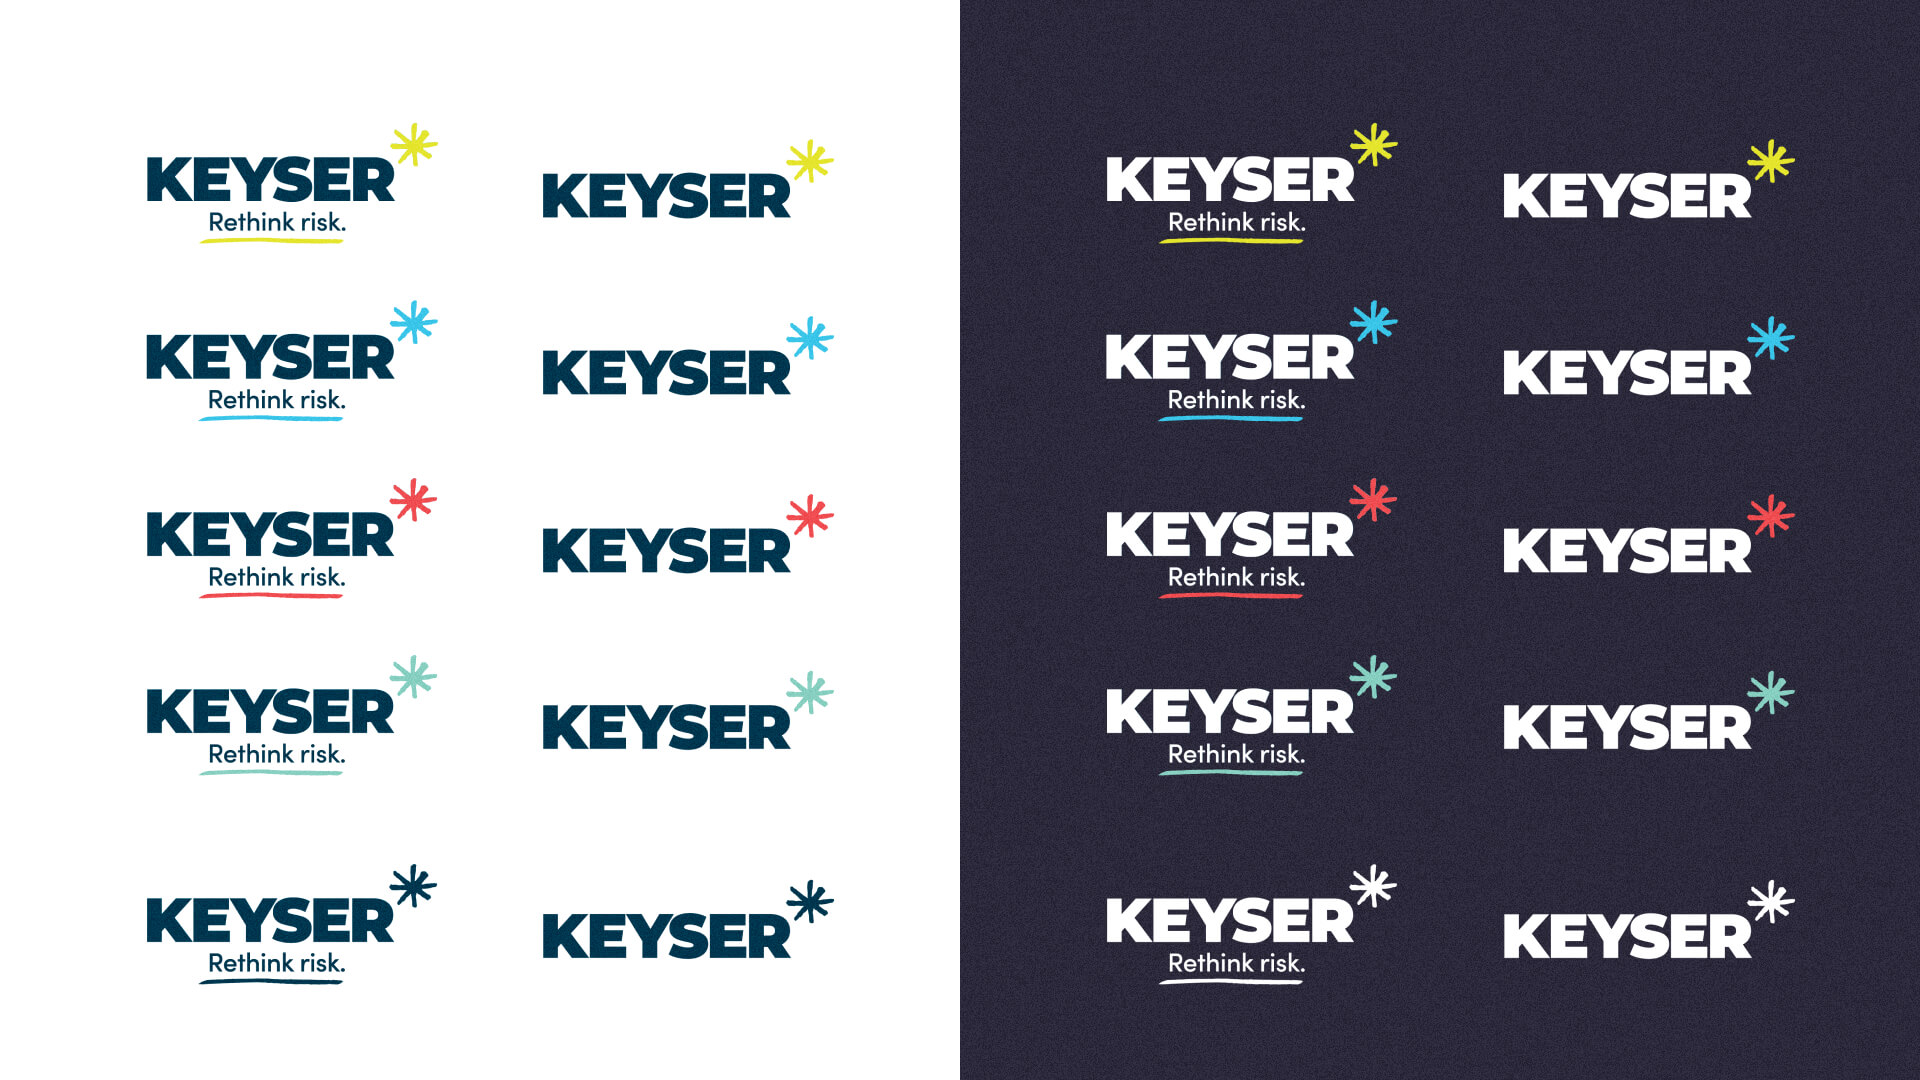 Various color combinations for the Keyser logo on white and black backgrounds.